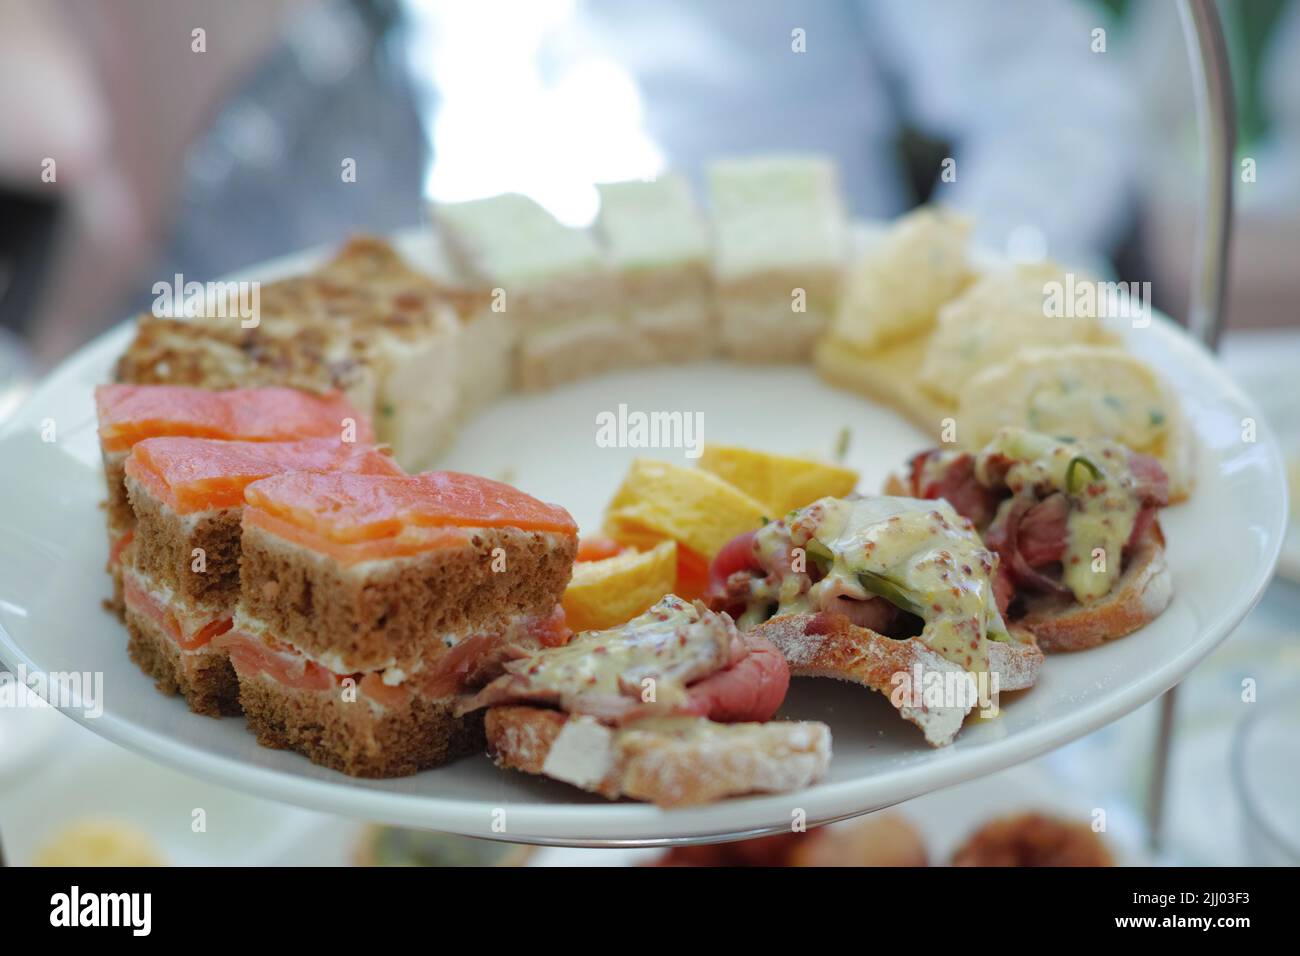 Tasty food platter at a luxury dinner event on a table. Delicious plate of food served for lunch or dinner at home. Healthy gourmet meal made at a Stock Photo